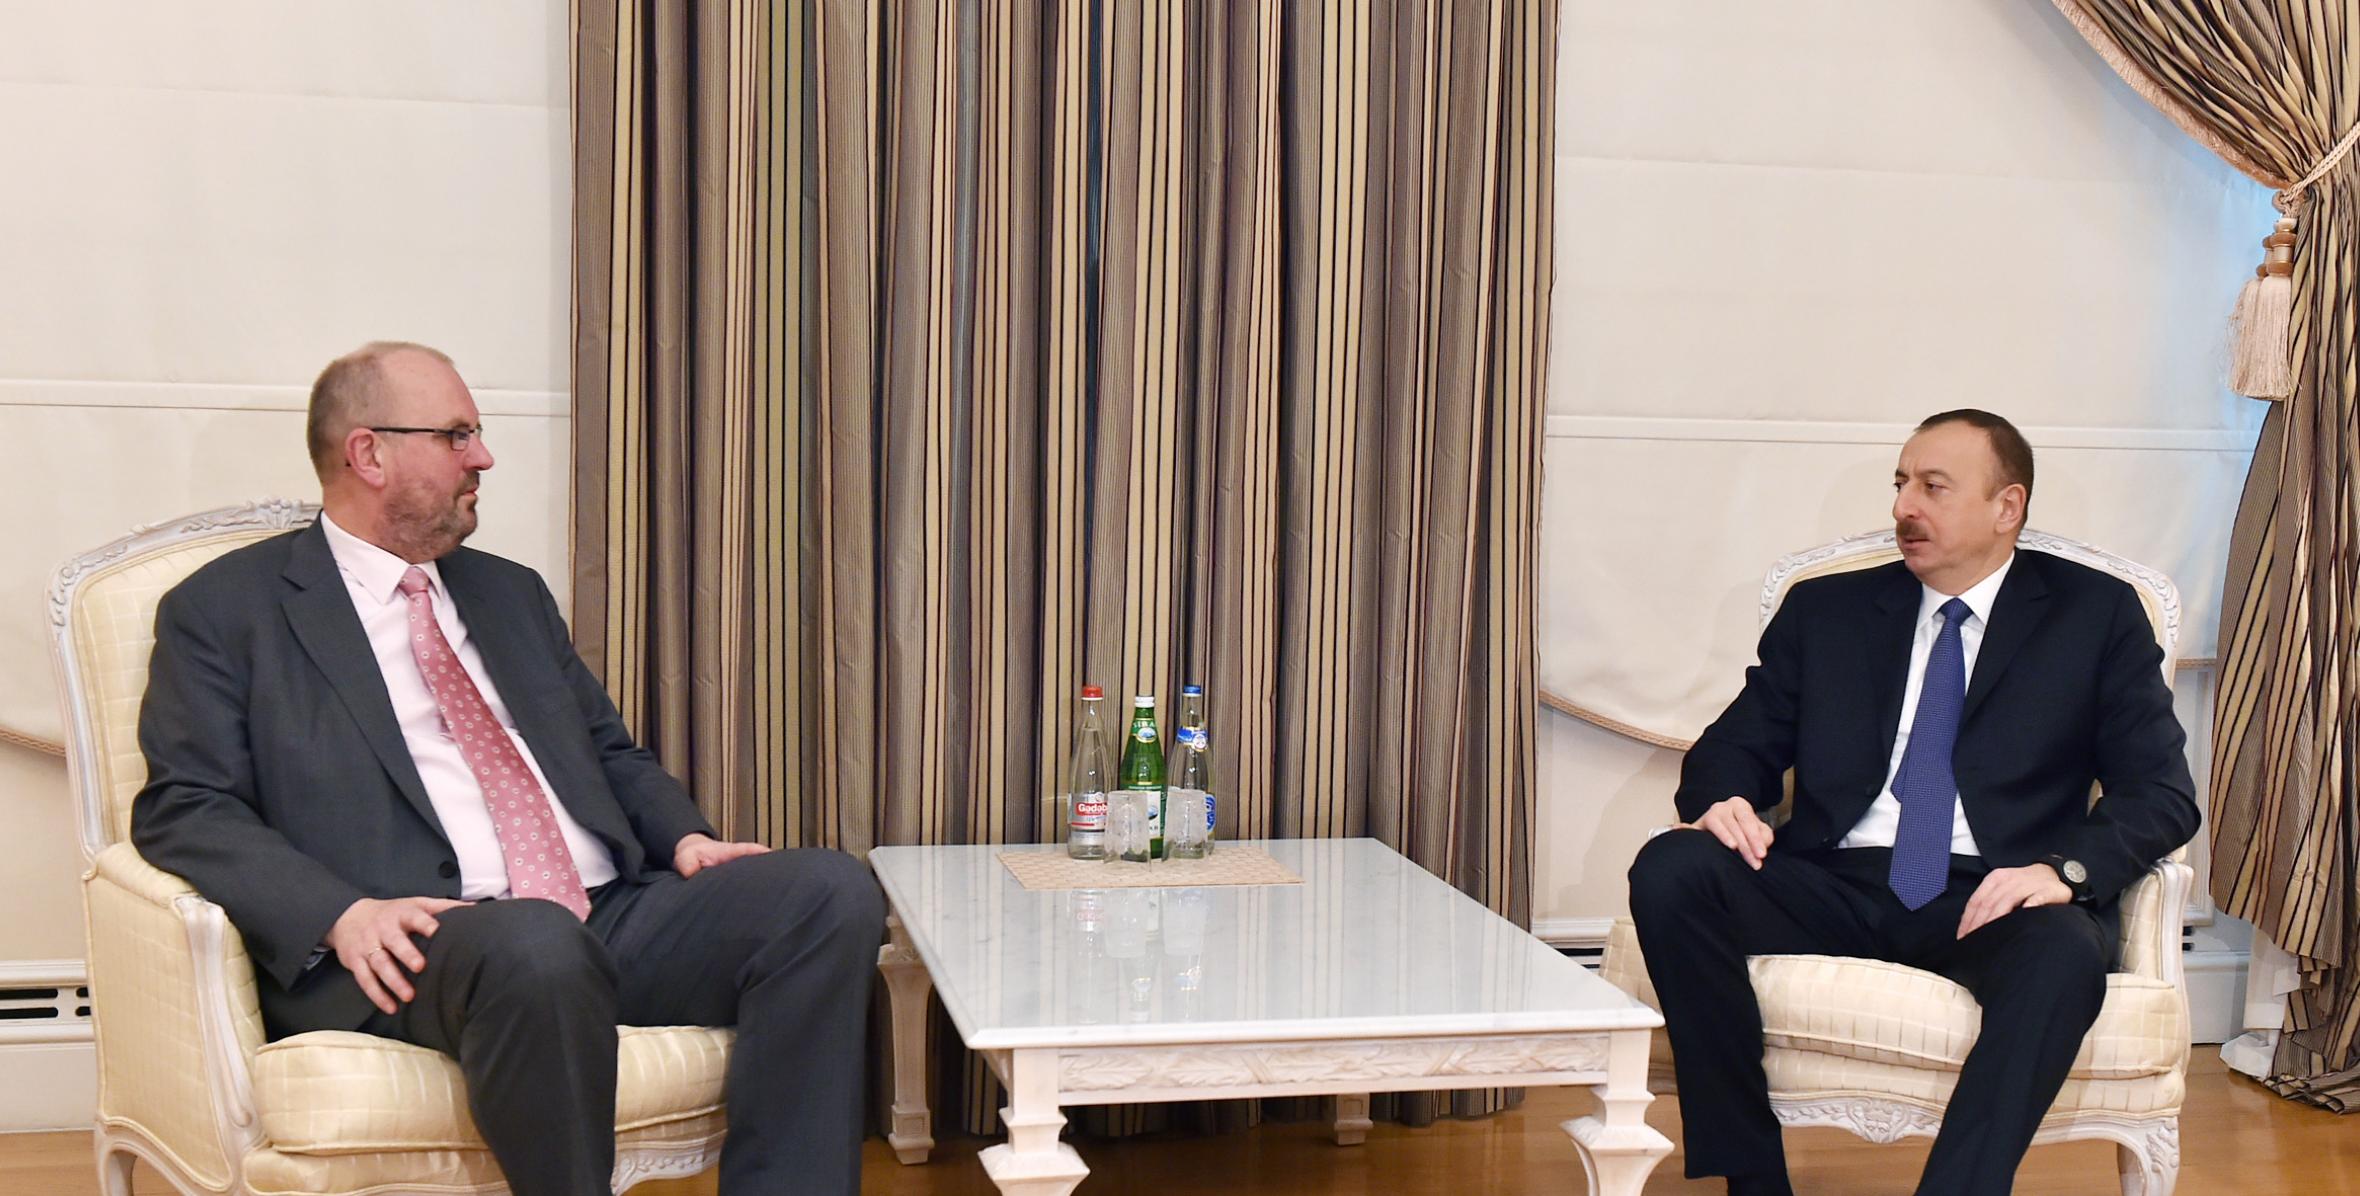 Ilham Aliyev received the President of the European Table Tennis Union